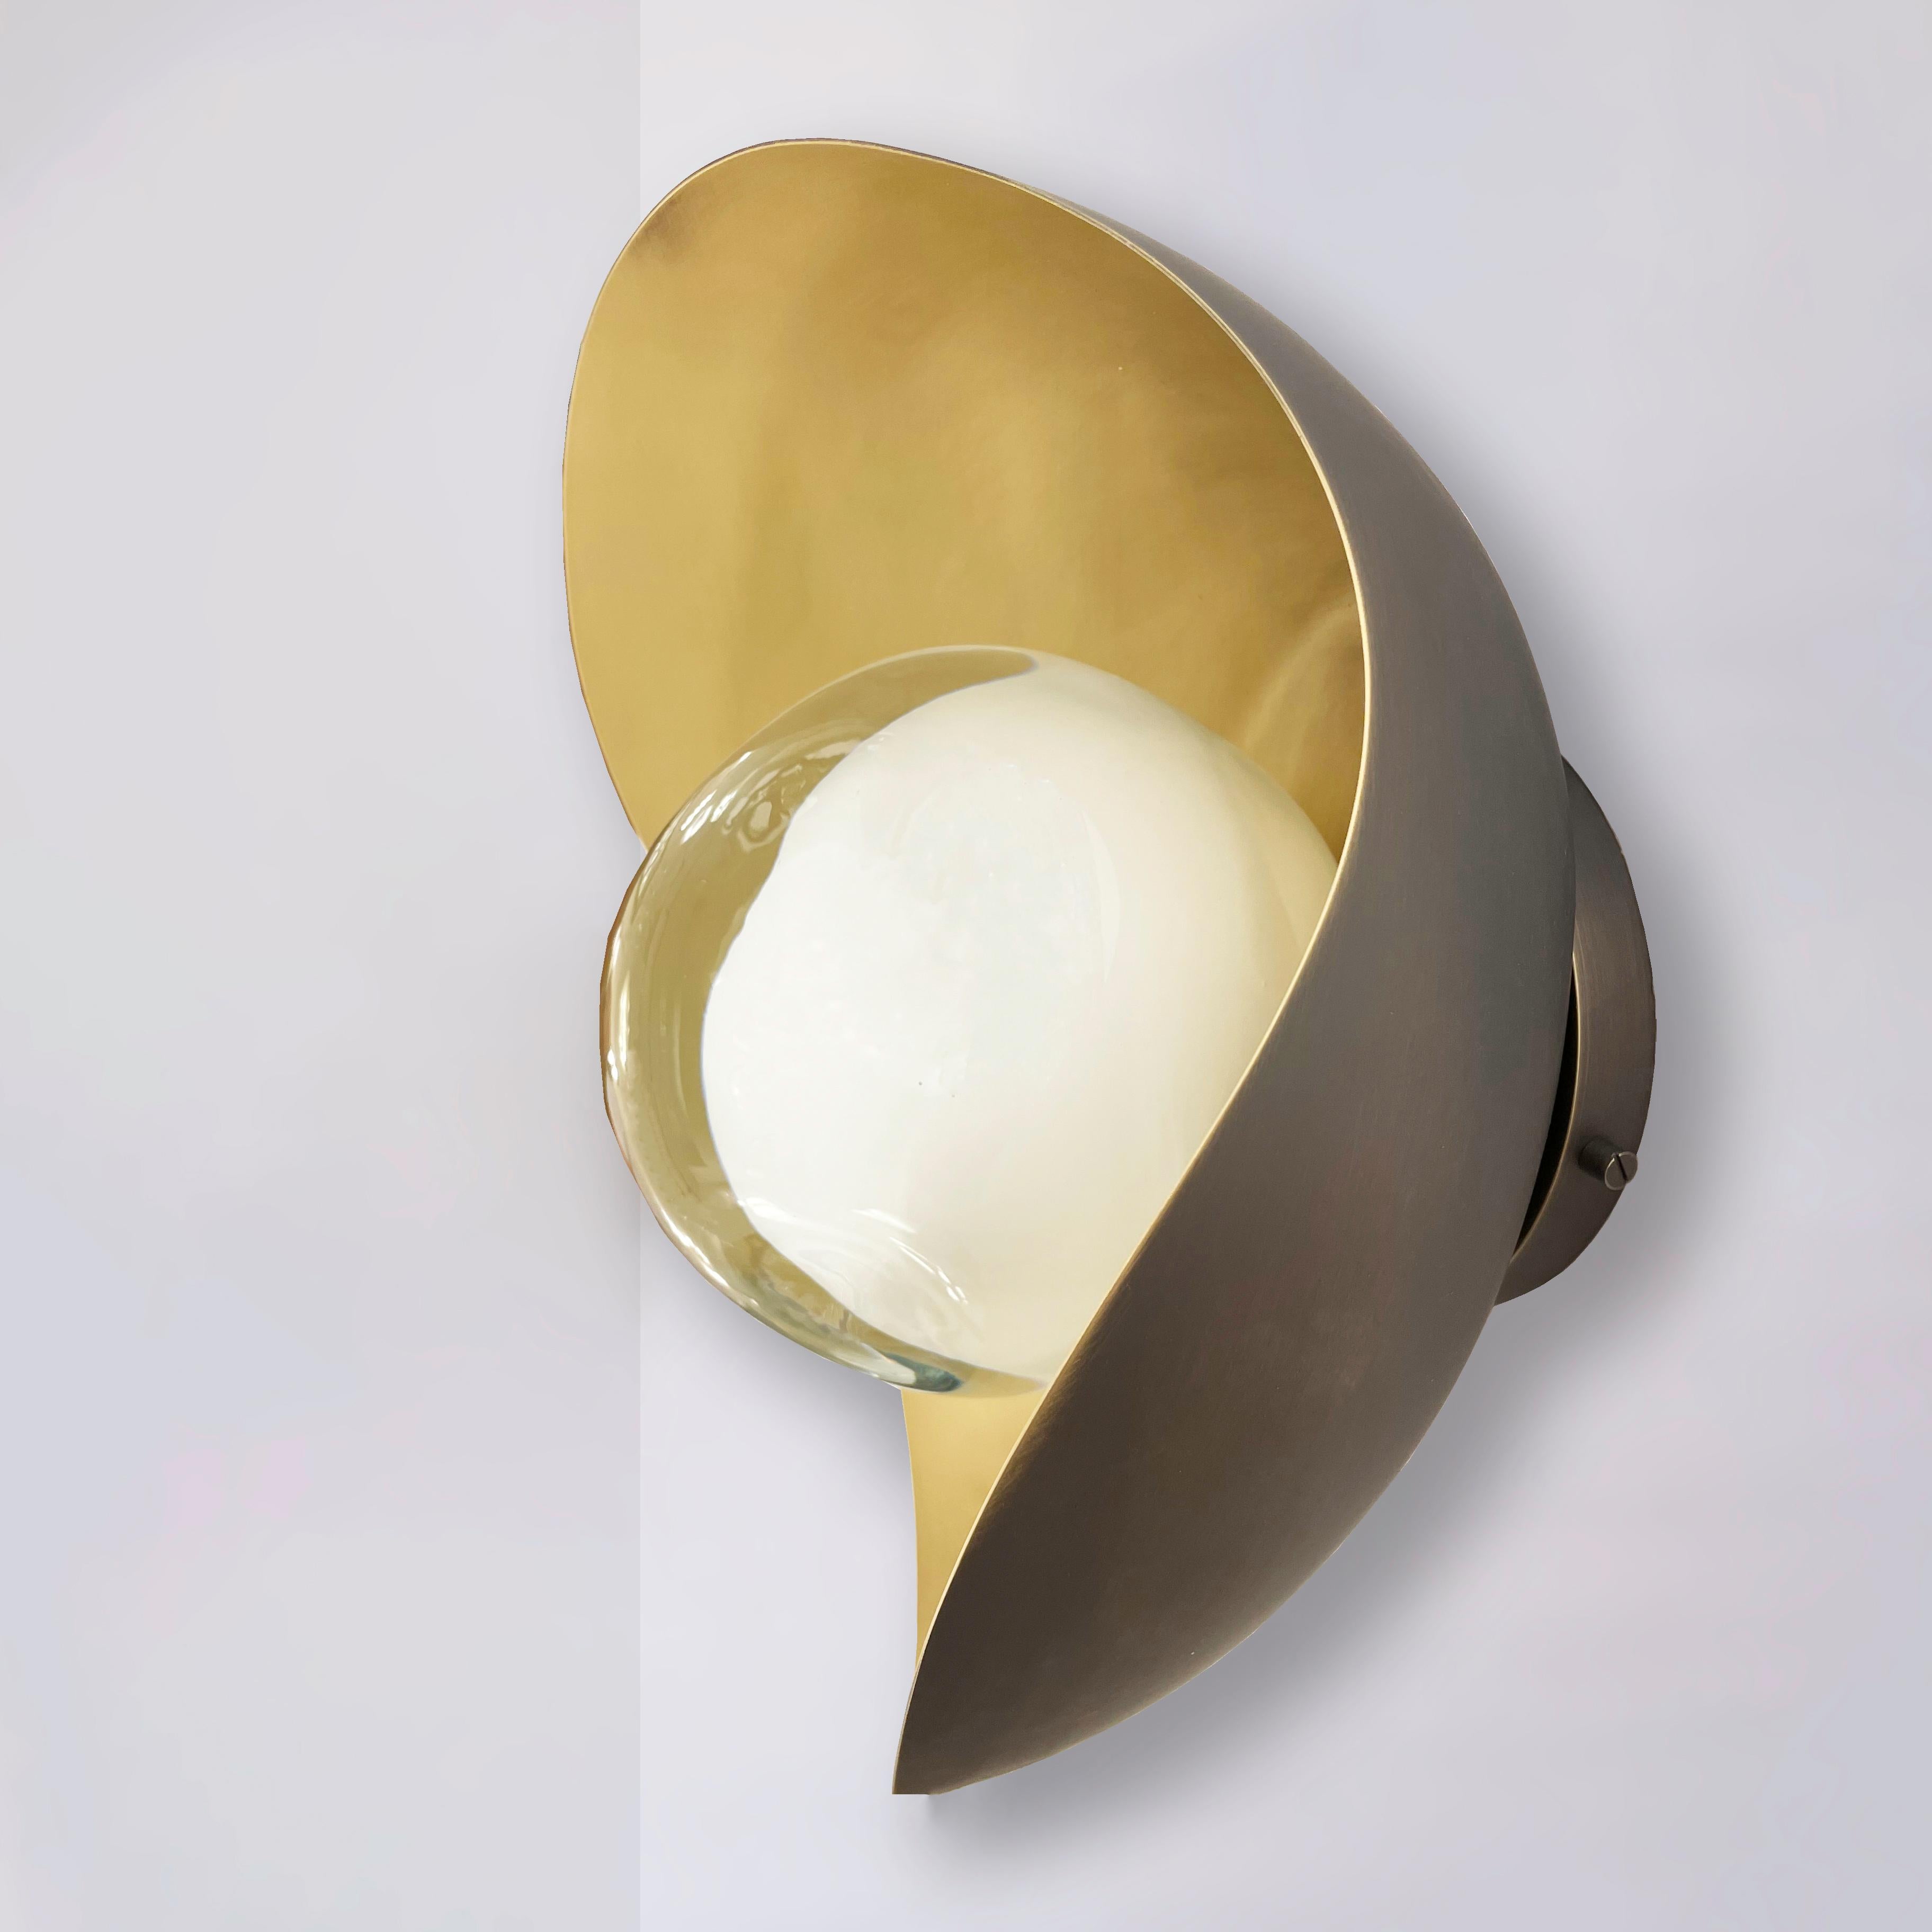 The Perla wall light features an organic brass shell nestling our Sfera glass handblown in Tuscany. The first images show the fixture with a satin brass interior and Bronzo Nuvolato (bronze) exterior finish-subsequent pictures show it in a selection